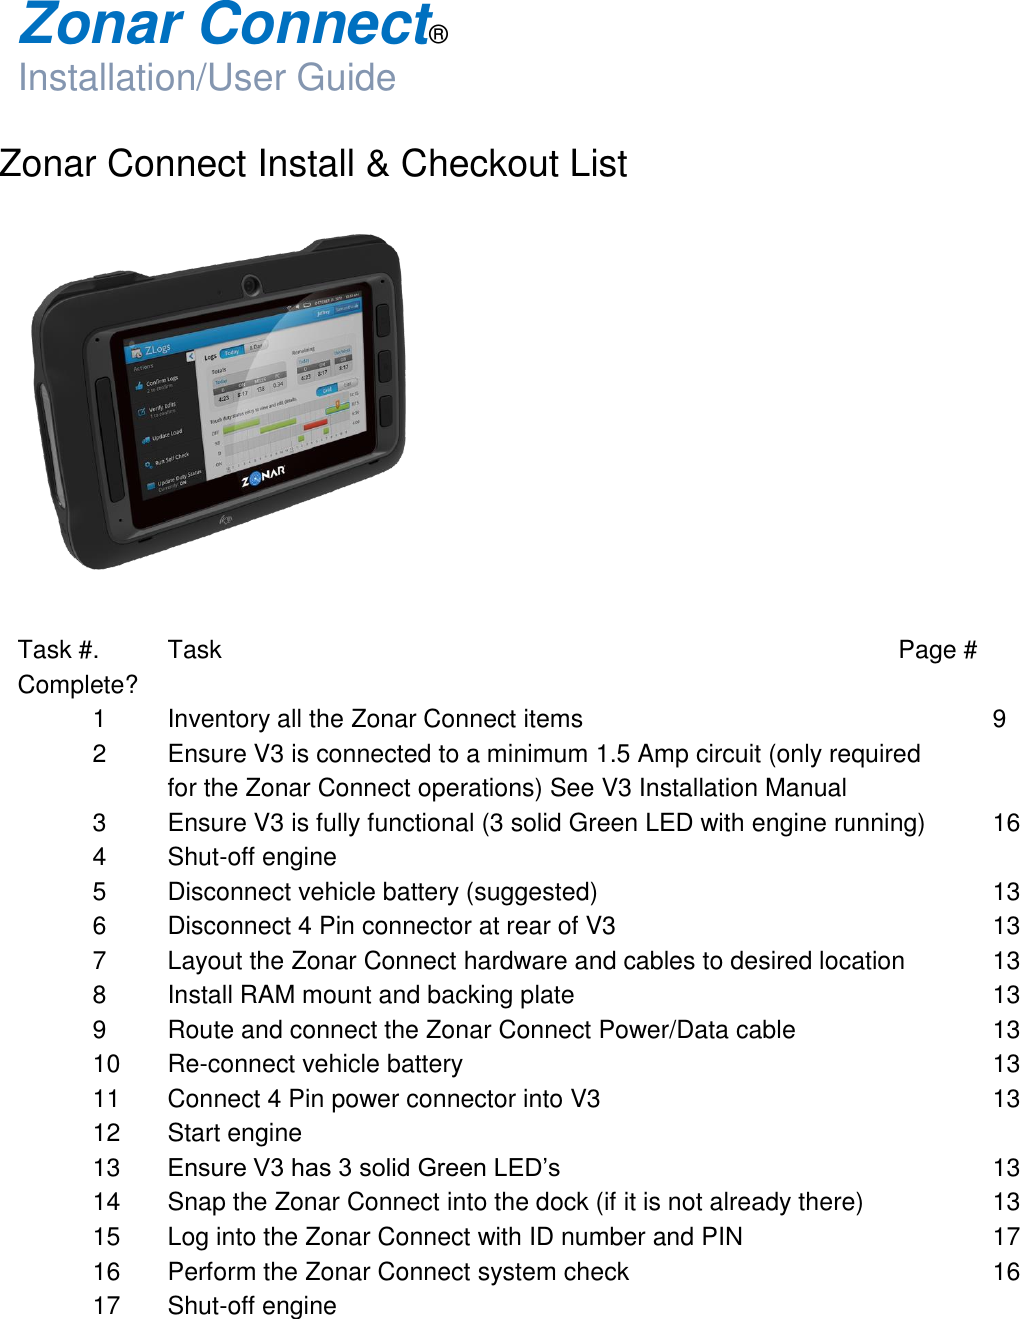  Zonar Connect®  Installation/User Guide  Zonar Connect Install &amp; Checkout List    Task #.  Task                          Page #      Complete?   1  Inventory all the Zonar Connect items            9   2  Ensure V3 is connected to a minimum 1.5 Amp circuit (only required      for the Zonar Connect operations) See V3 Installation Manual   3  Ensure V3 is fully functional (3 solid Green LED with engine running)  16   4  Shut-off engine   5  Disconnect vehicle battery (suggested)            13   6  Disconnect 4 Pin connector at rear of V3           13   7  Layout the Zonar Connect hardware and cables to desired location    13   8  Install RAM mount and backing plate            13   9  Route and connect the Zonar Connect Power/Data cable      13  10 Re-connect vehicle battery               13  11  Connect 4 Pin power connector into V3            13  12  Start engine  13 Ensure V3 has 3 solid Green LED’s      13  14  Snap the Zonar Connect into the dock (if it is not already there)    13  15  Log into the Zonar Connect with ID number and PIN        17  16  Perform the Zonar Connect system check          16  17  Shut-off engine     